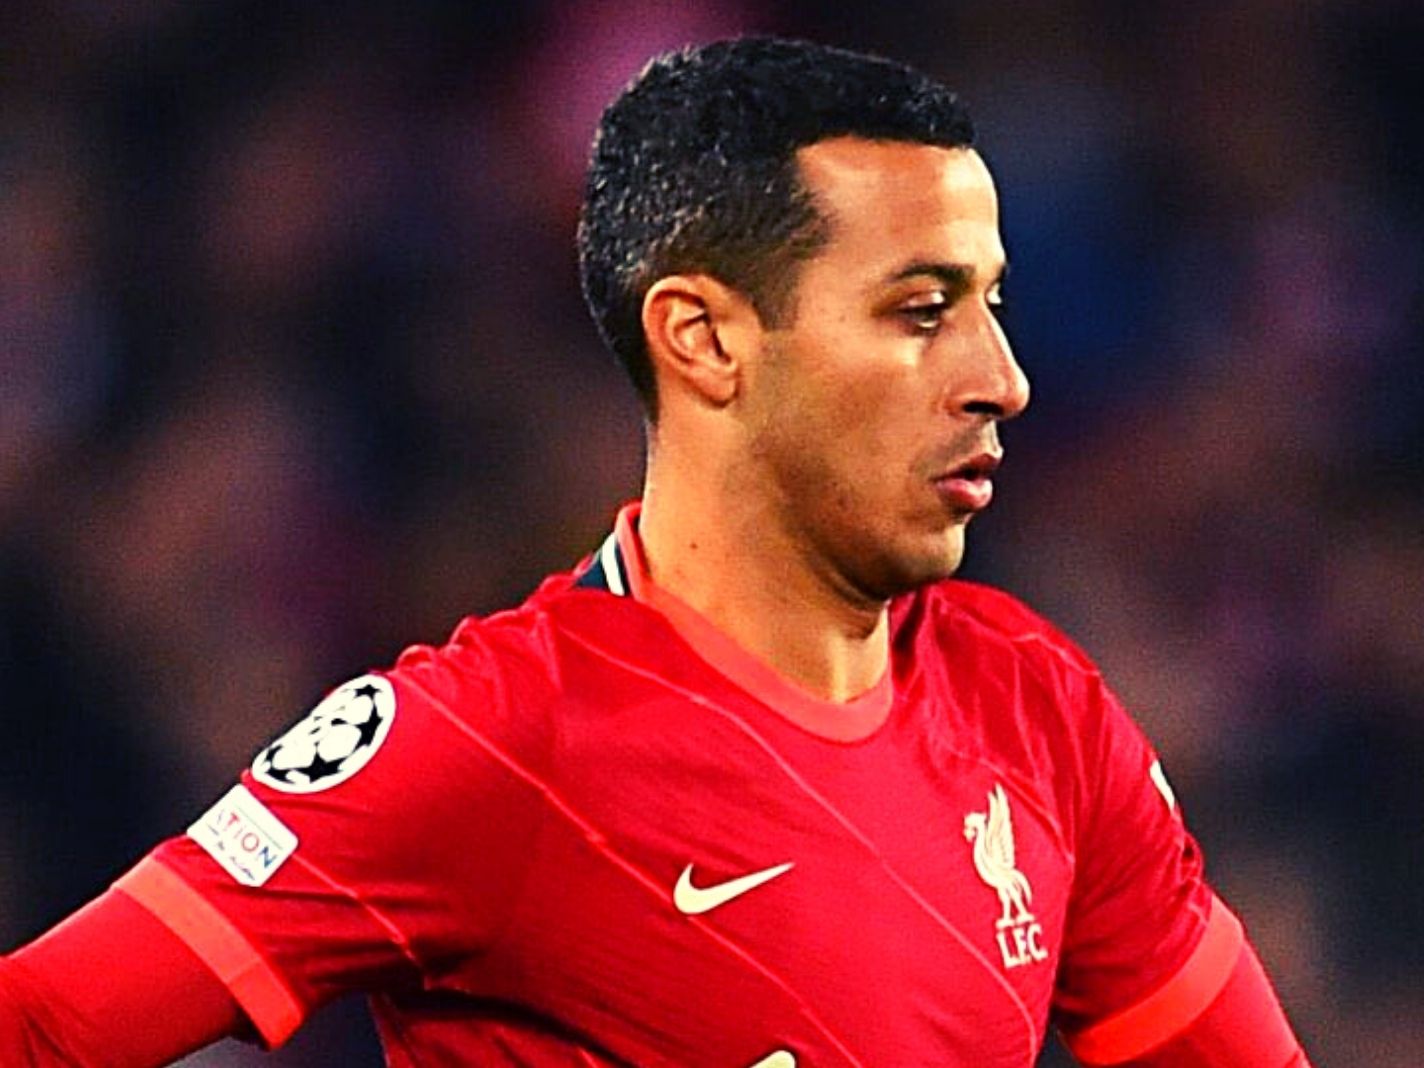 Thiago Turn: The signature skill that helps Liverpool midfielder stand out above all